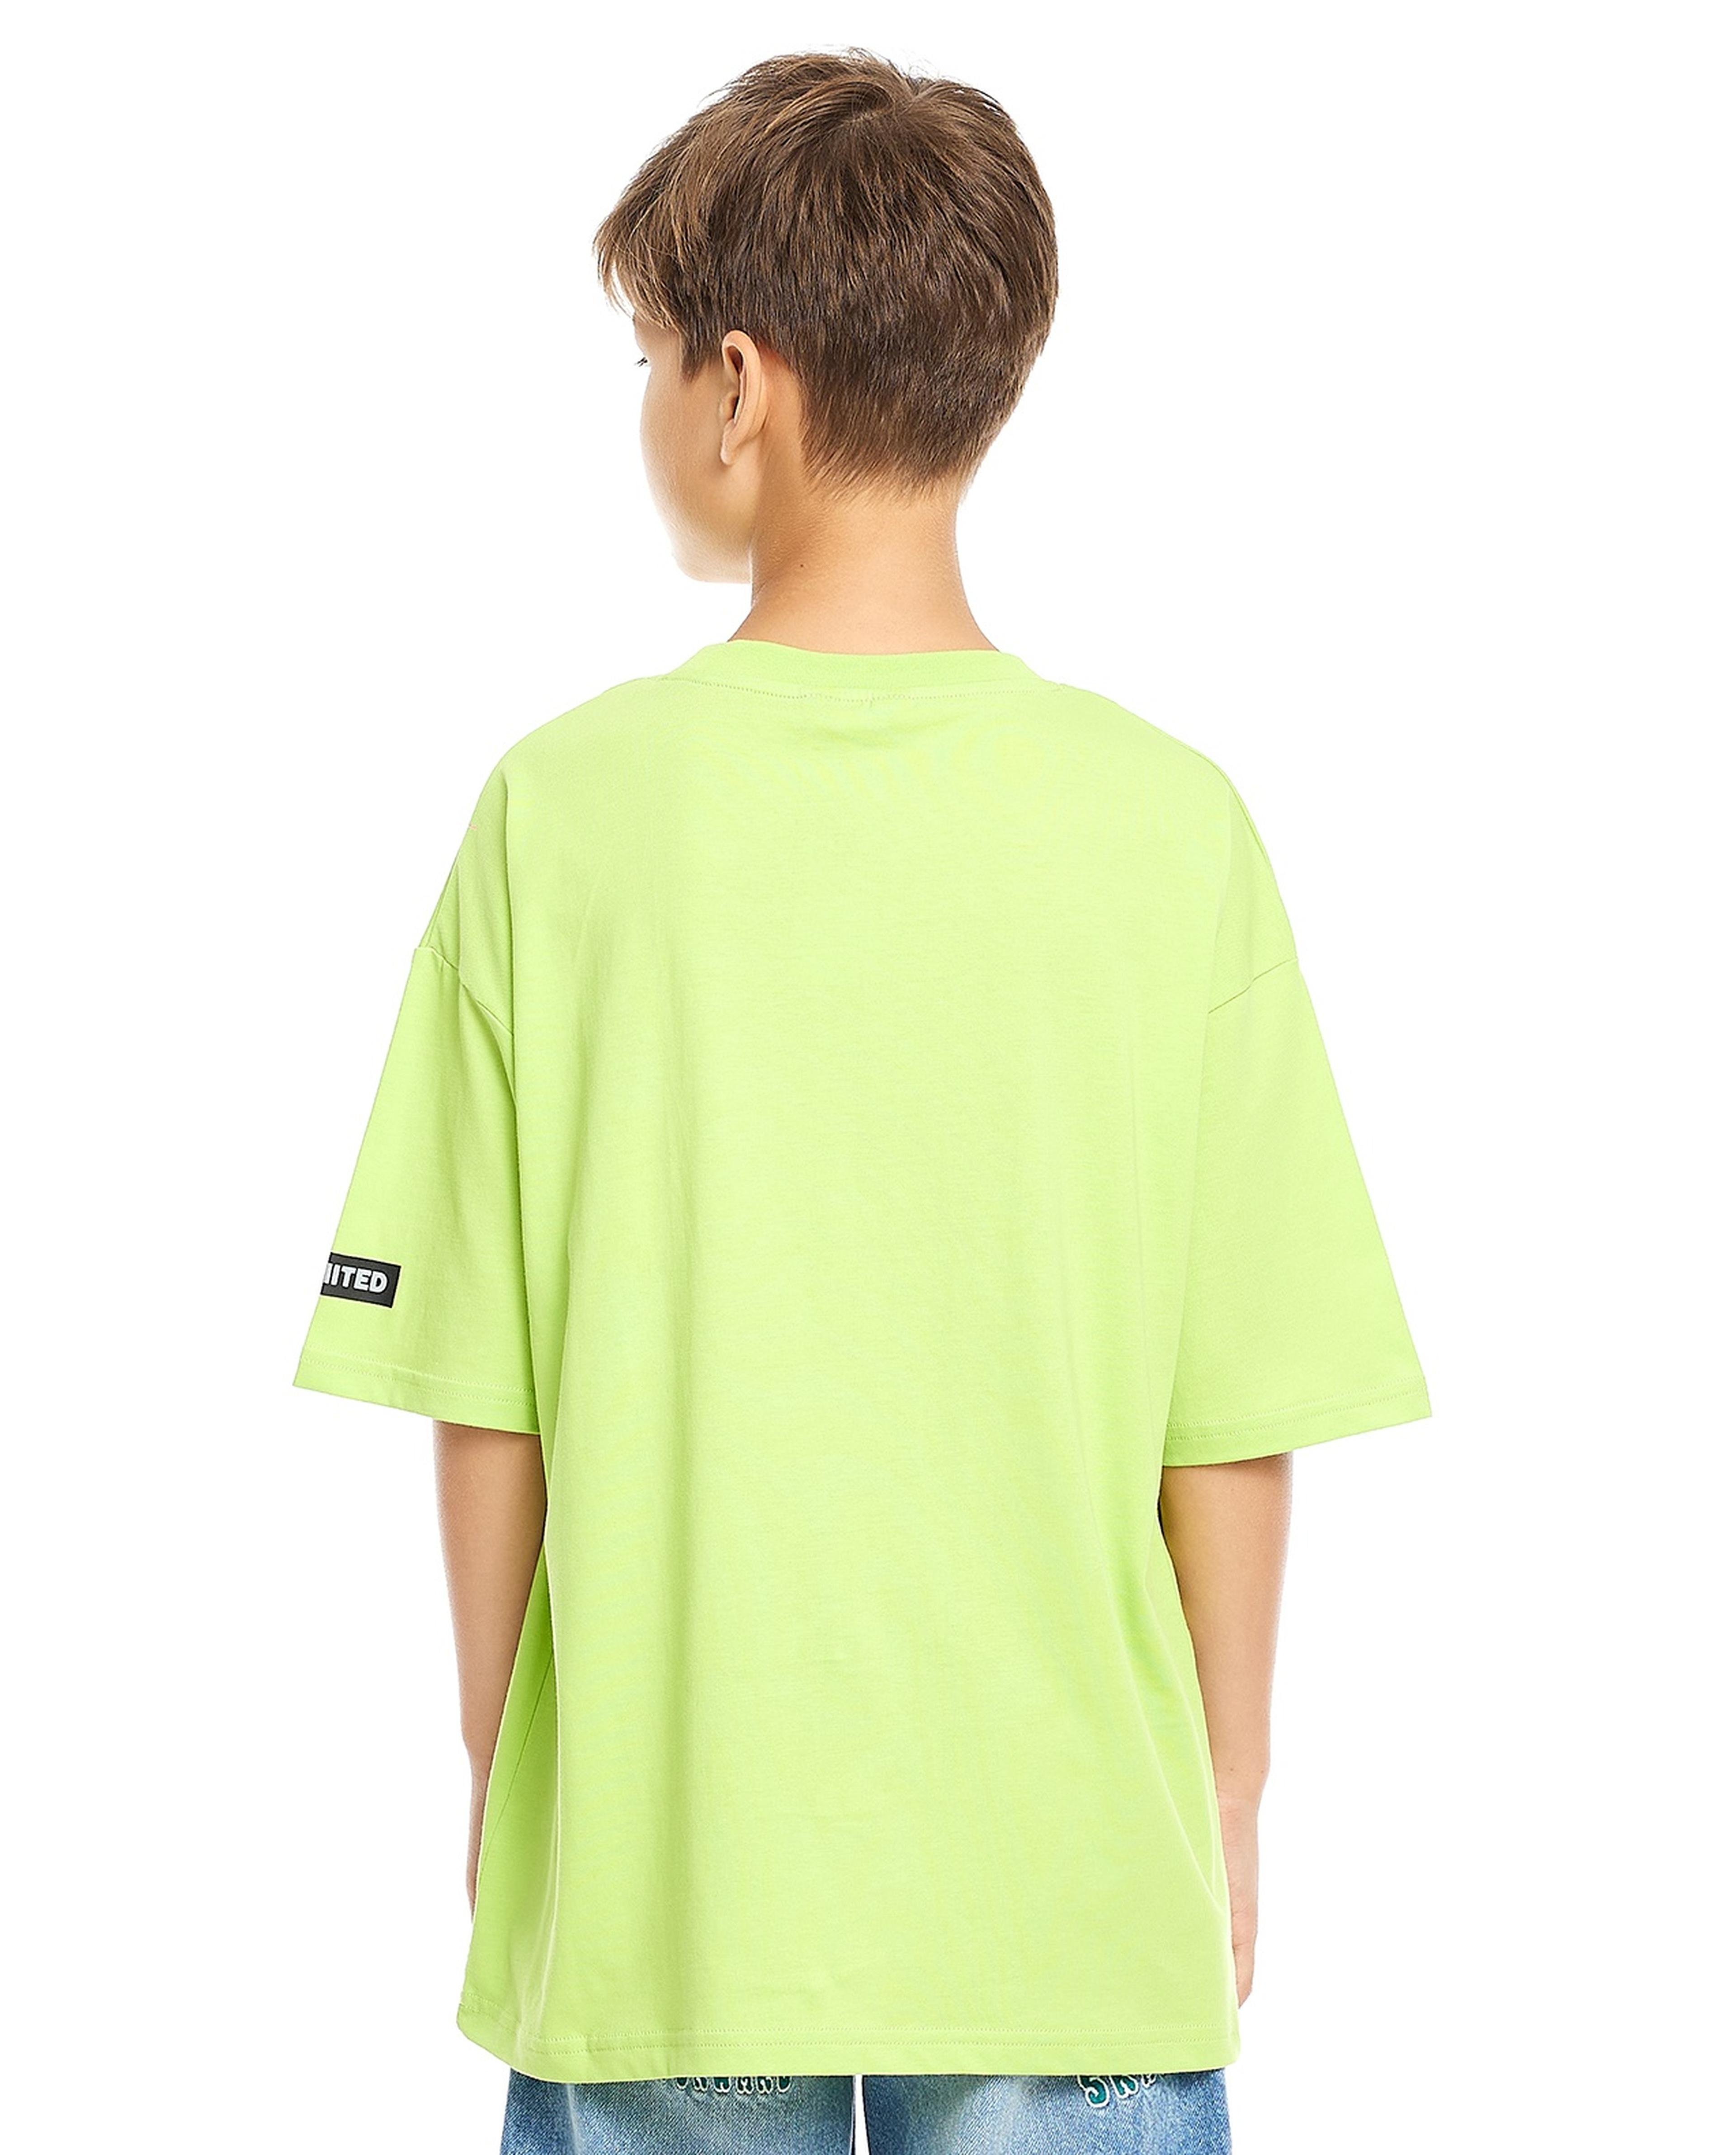 Patch Detail Oversized T-Shirt with Crew Neck and Short Sleeves